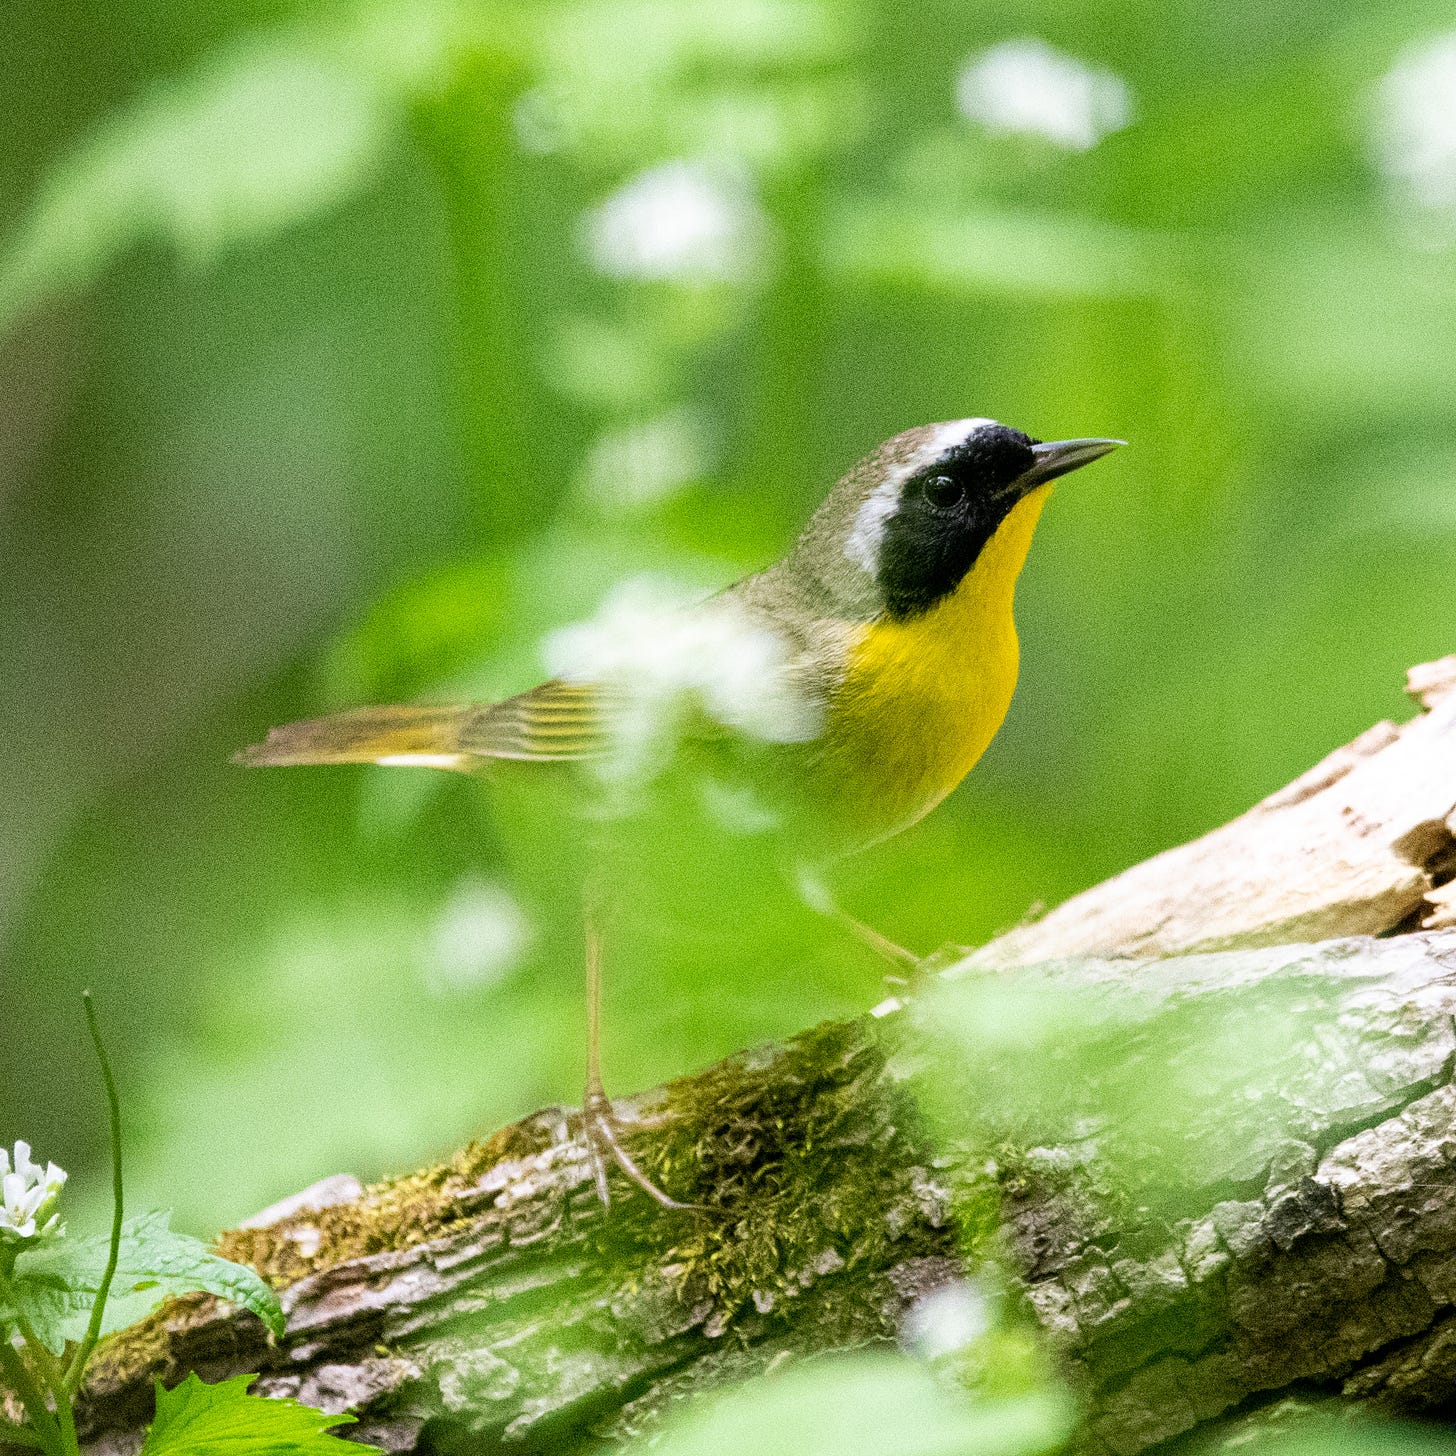 A male common yellowthroat perched on a log, in profile